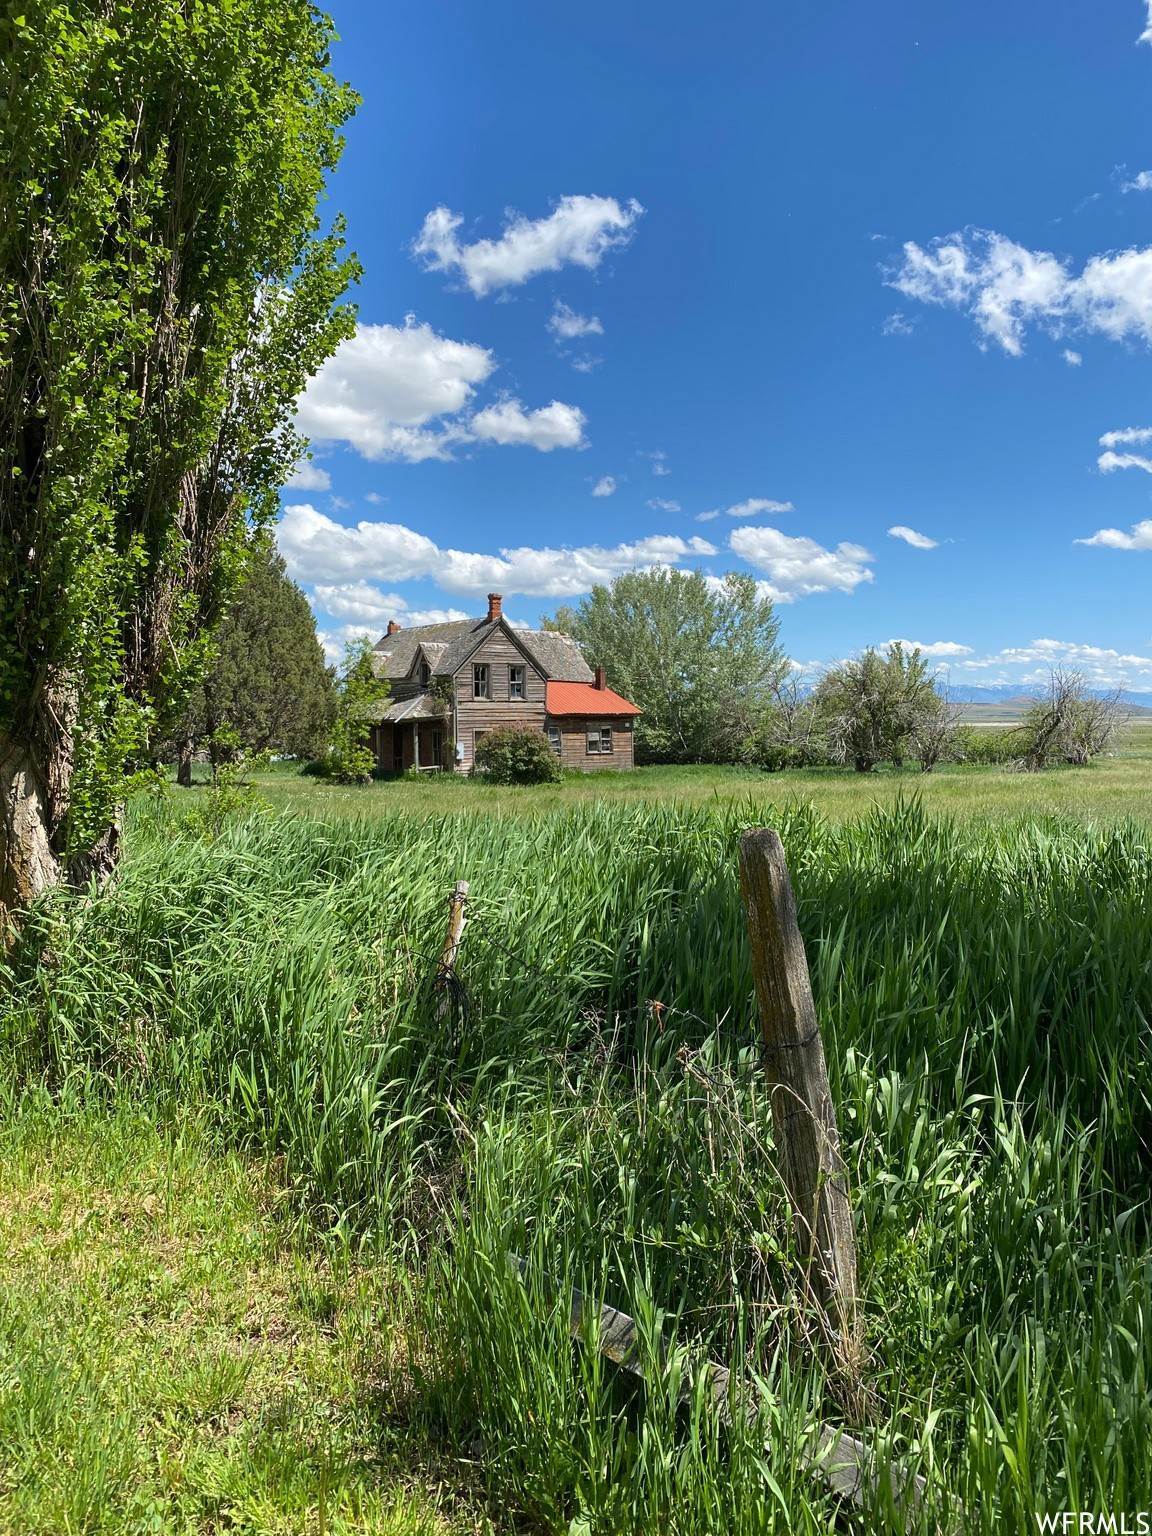 Farm / Agriculture for Sale at Clifton, ID 83228